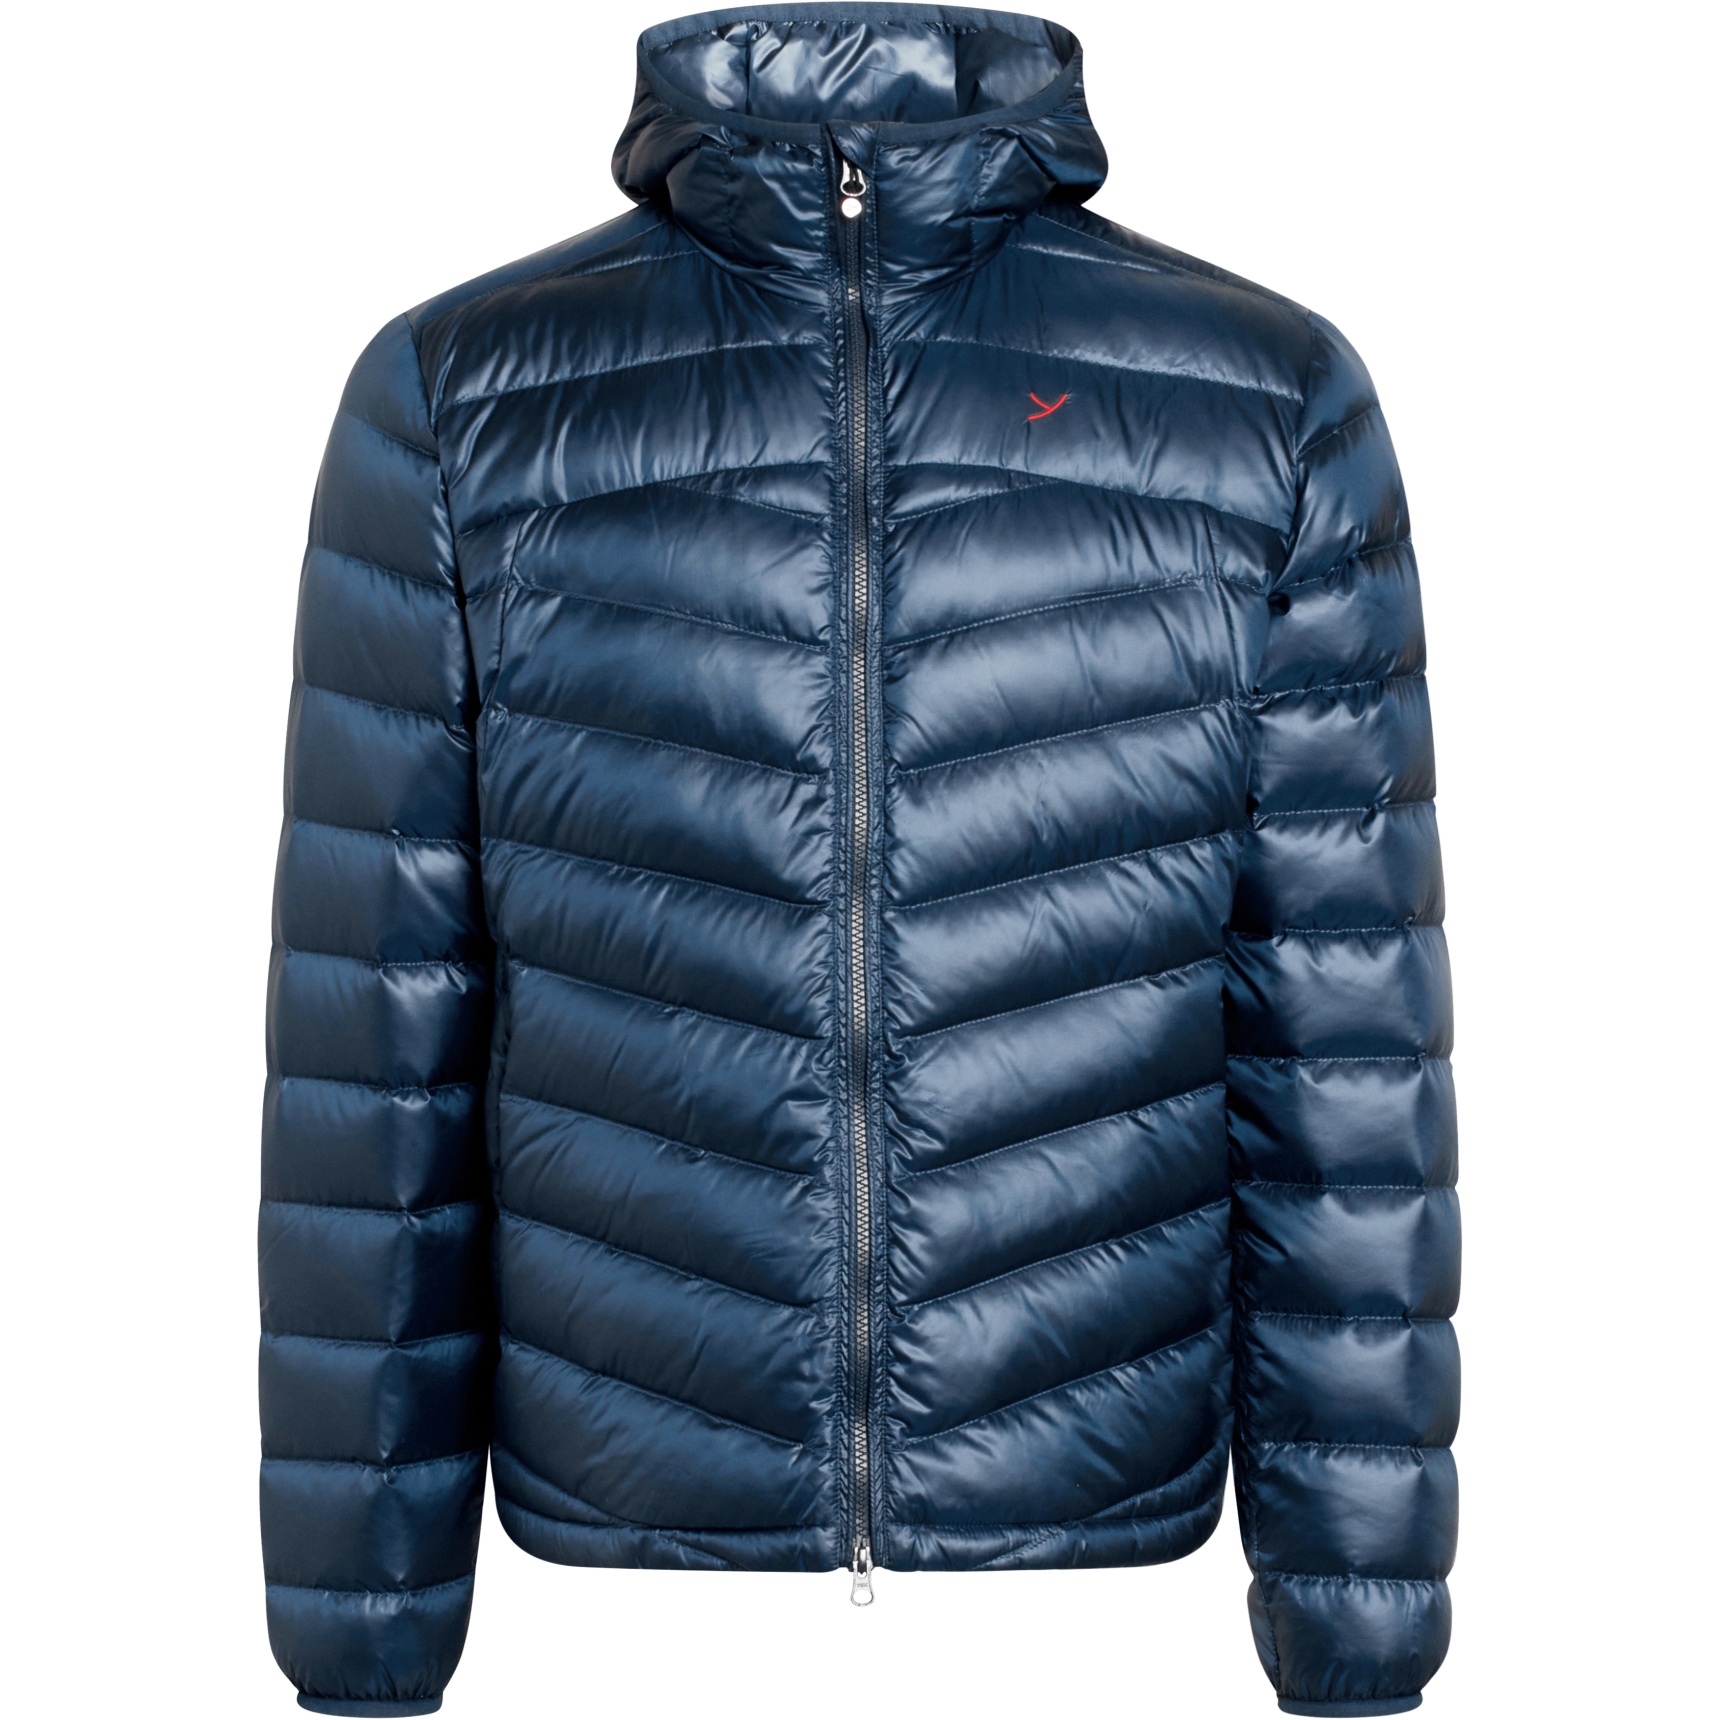 Picture of Y by Nordisk Payne Lightweight Down Jacket - mood indigo